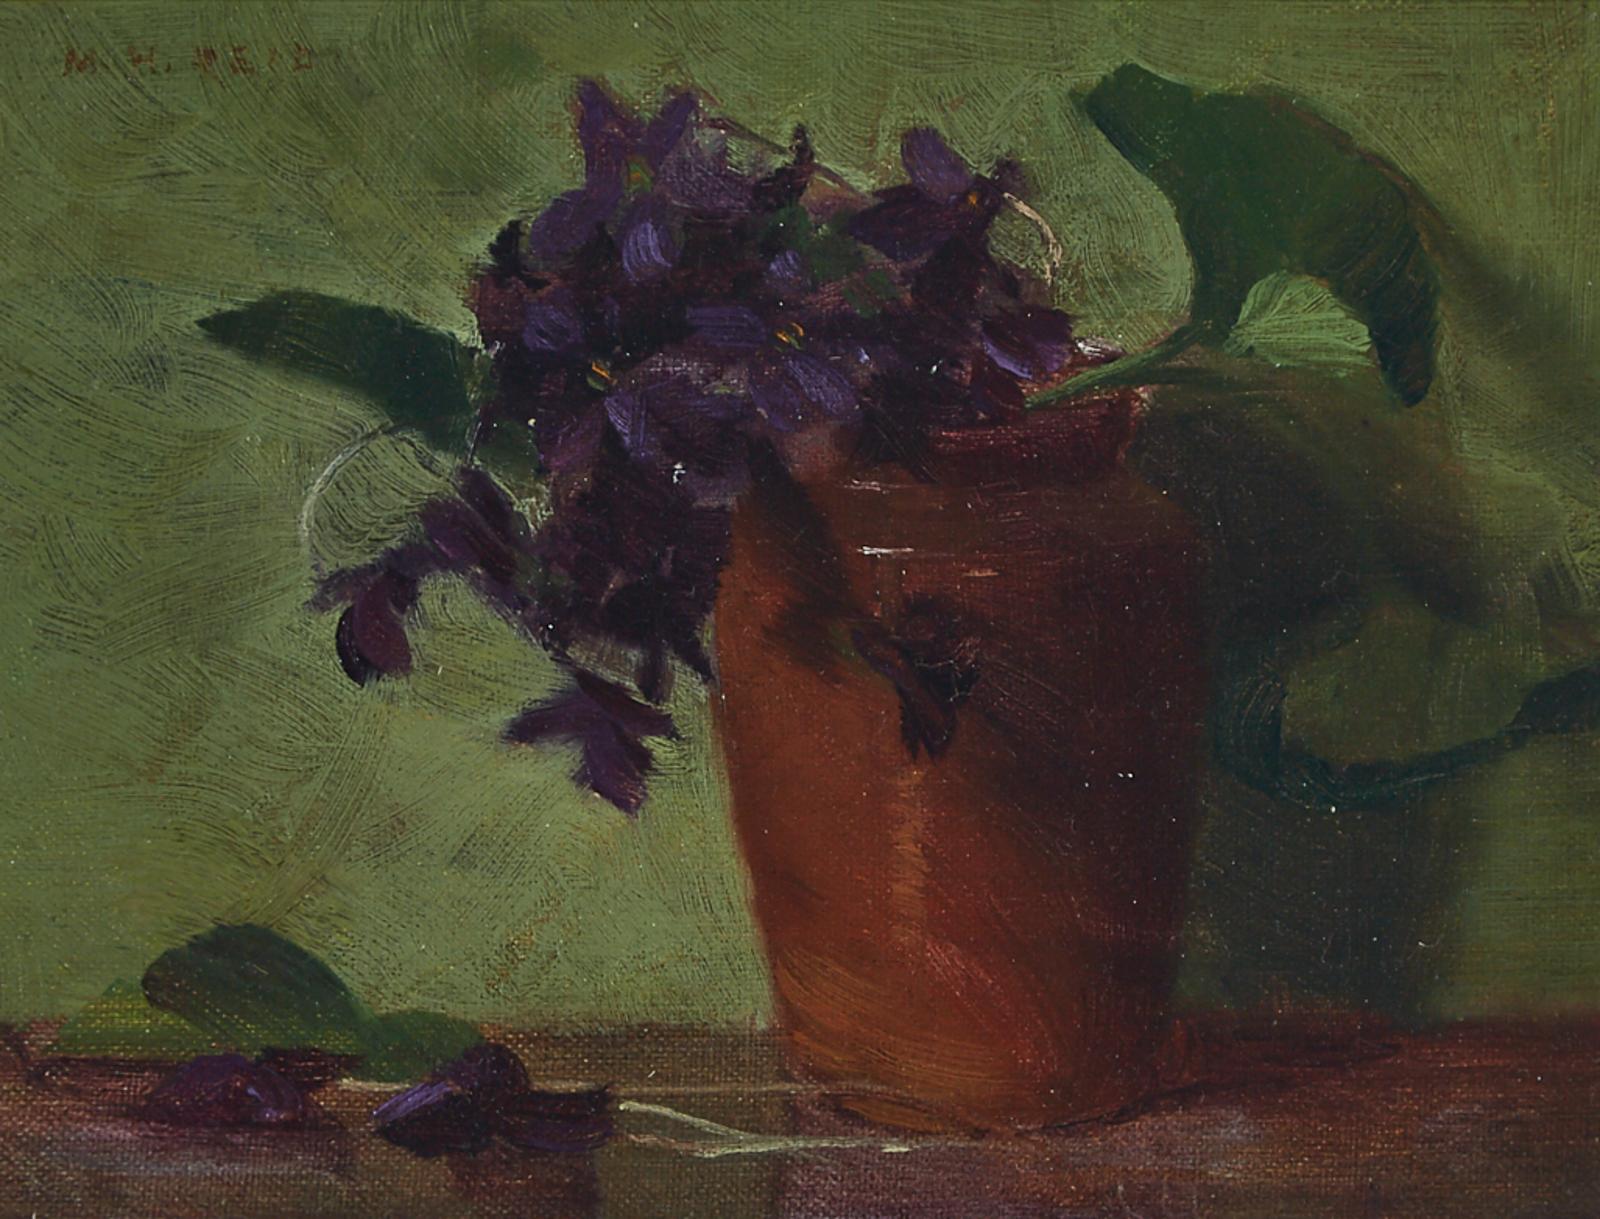 Mary Augusta Hiester Reid (1854-1921) - African Violets